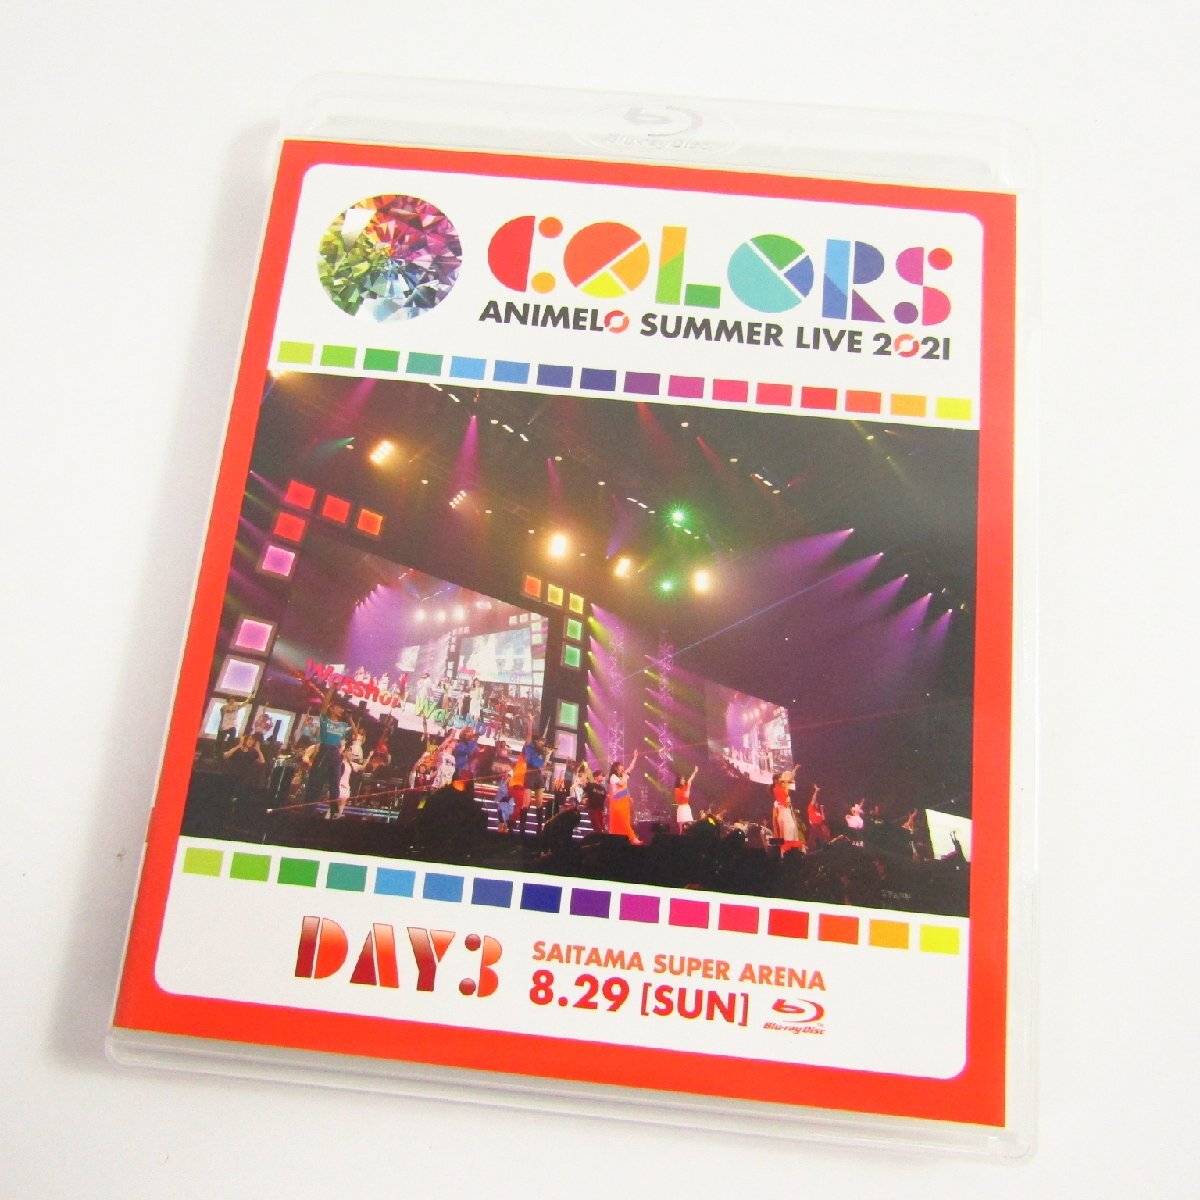 Animelo Summer Live 2021 -COLORS- 8.29 Blu-ray 〓A1221_画像3